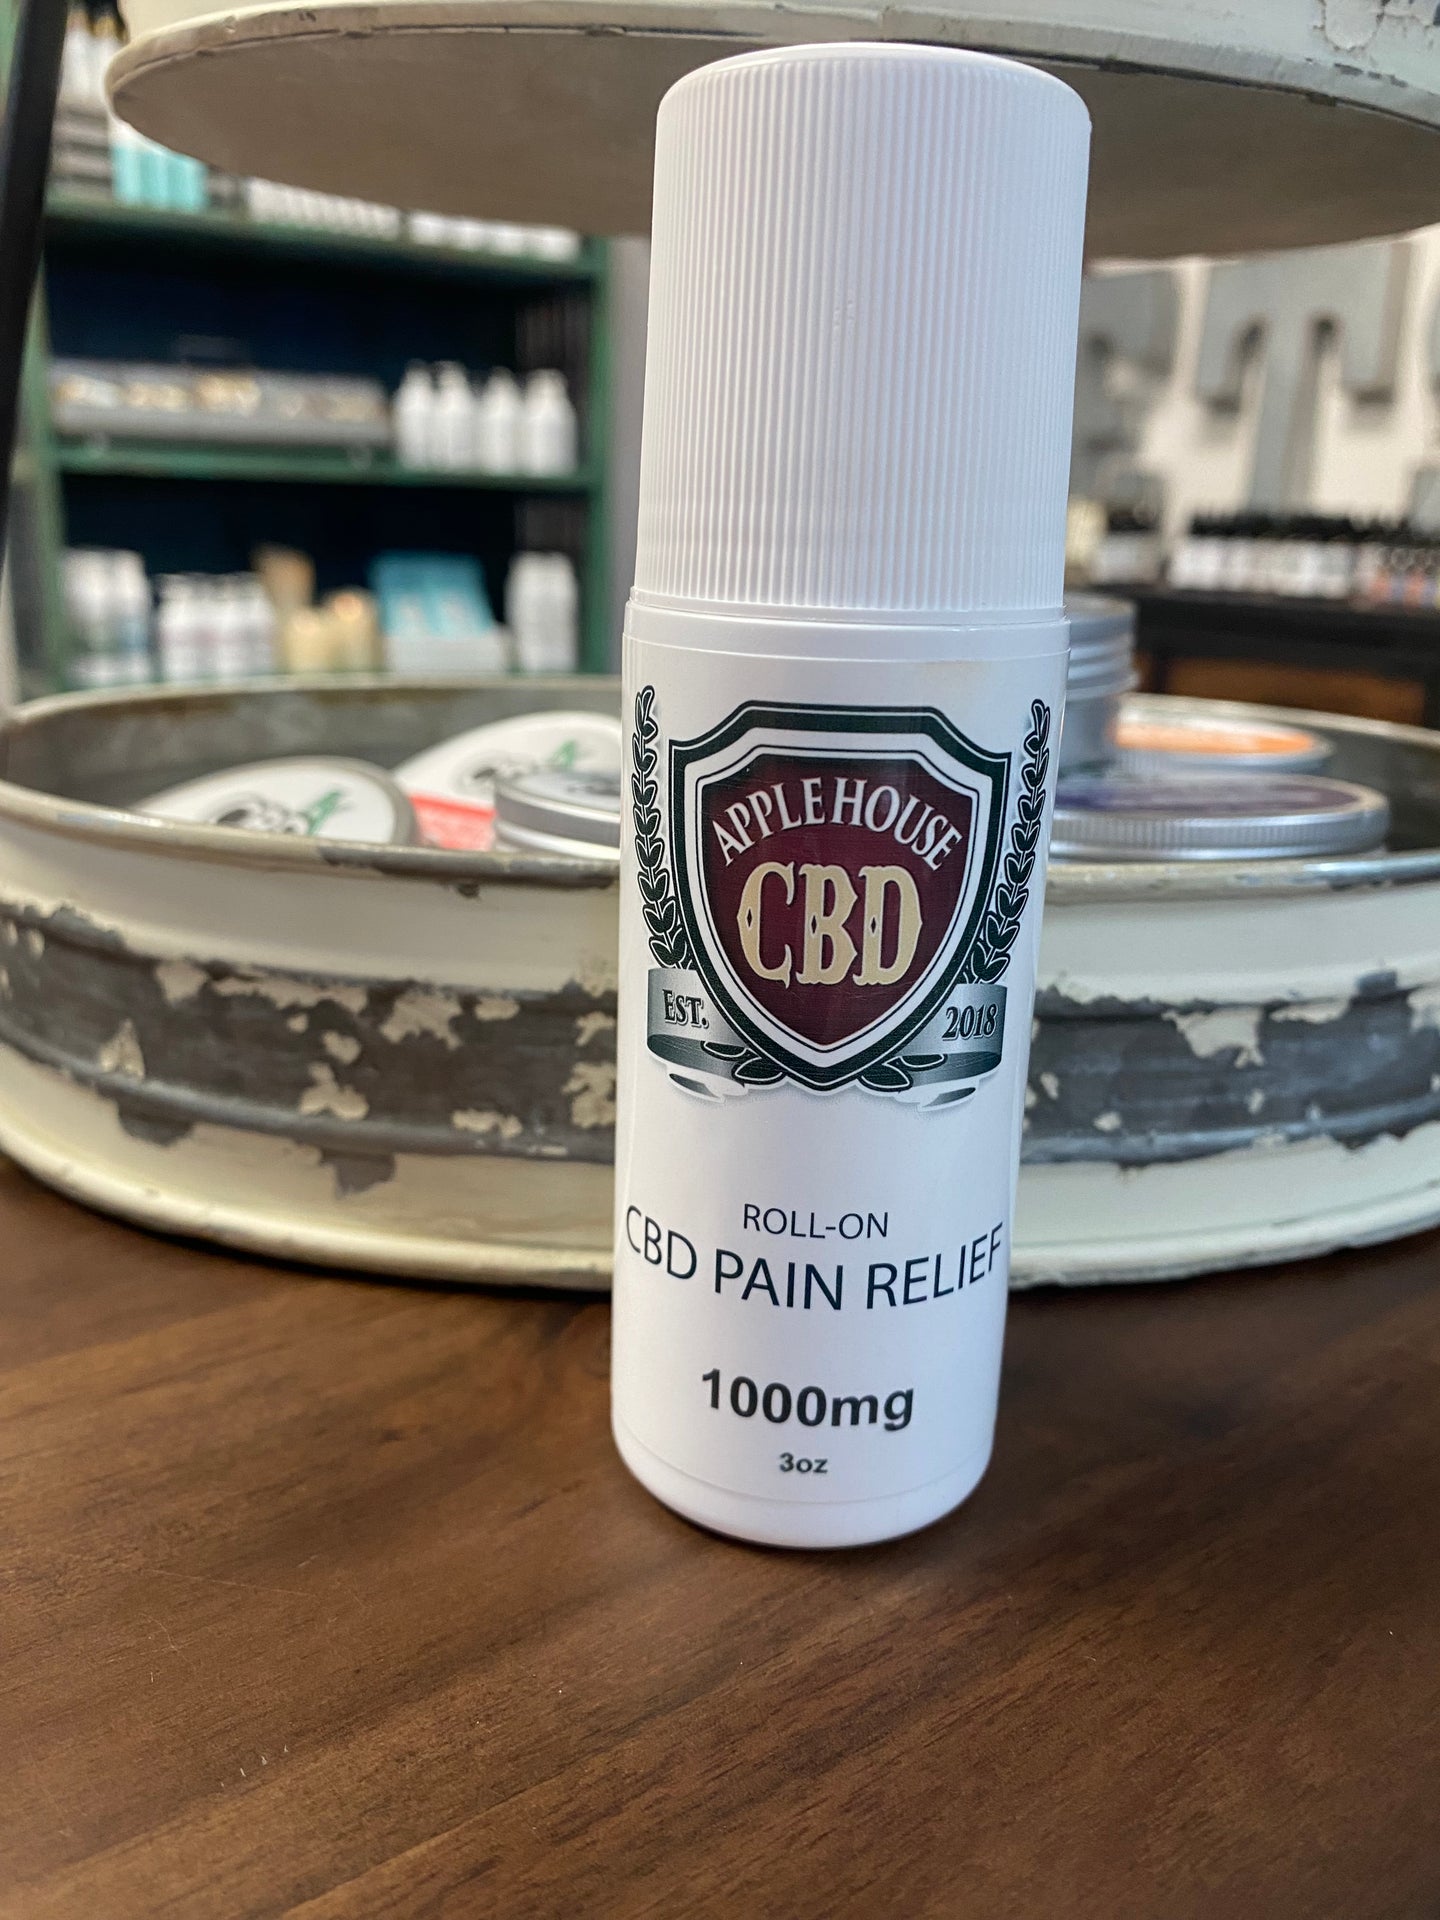 Applehouse CBD Topical Roll-On 1000mg Unscented 3oz.